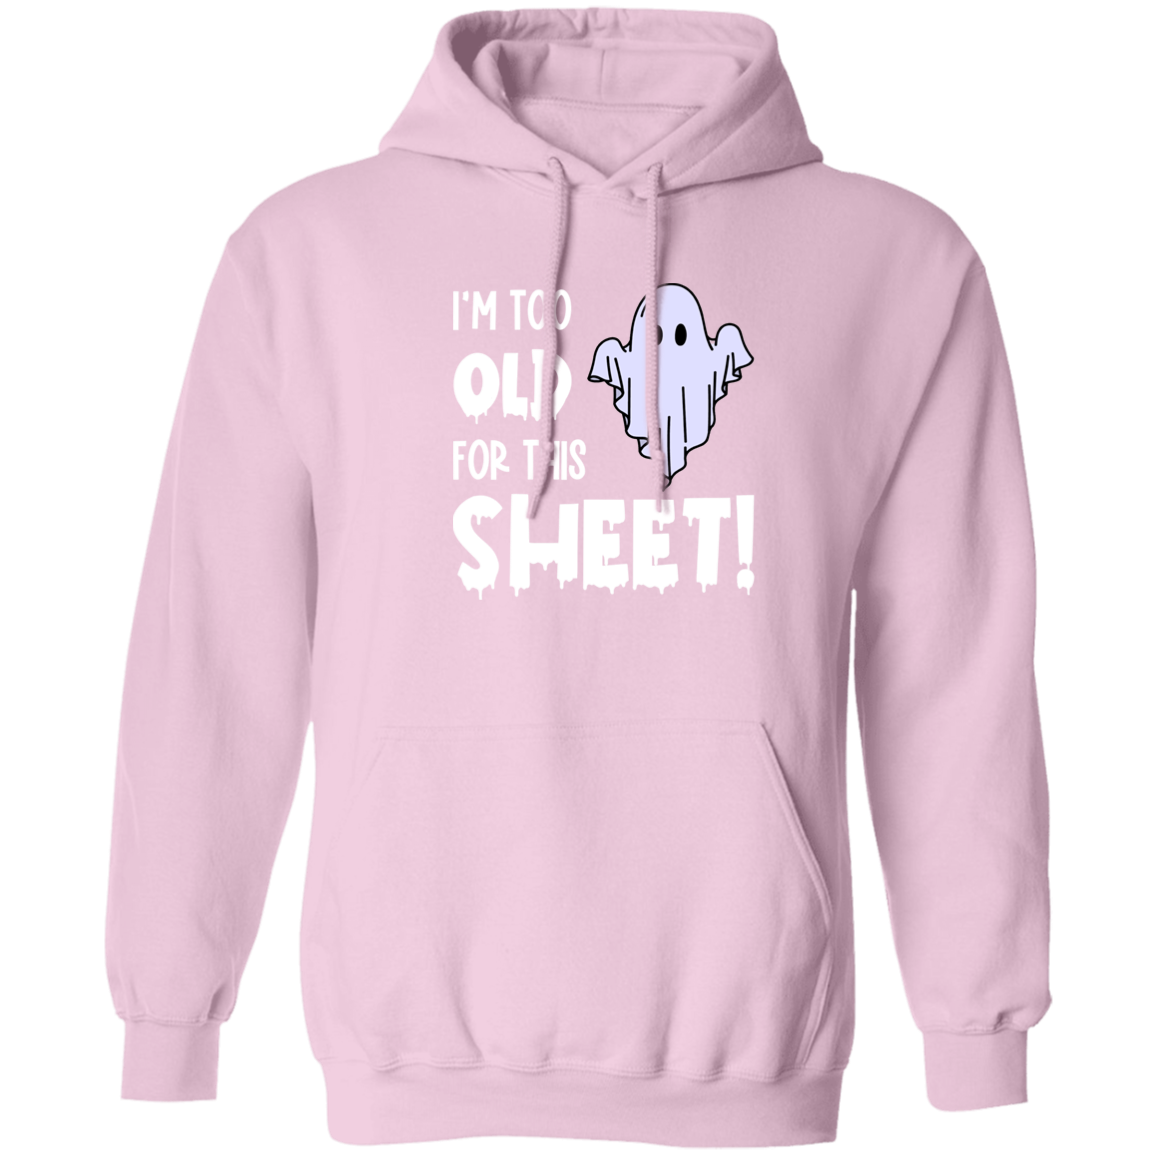 Too Old for this Sheet! Unisex Pullover Hoodie